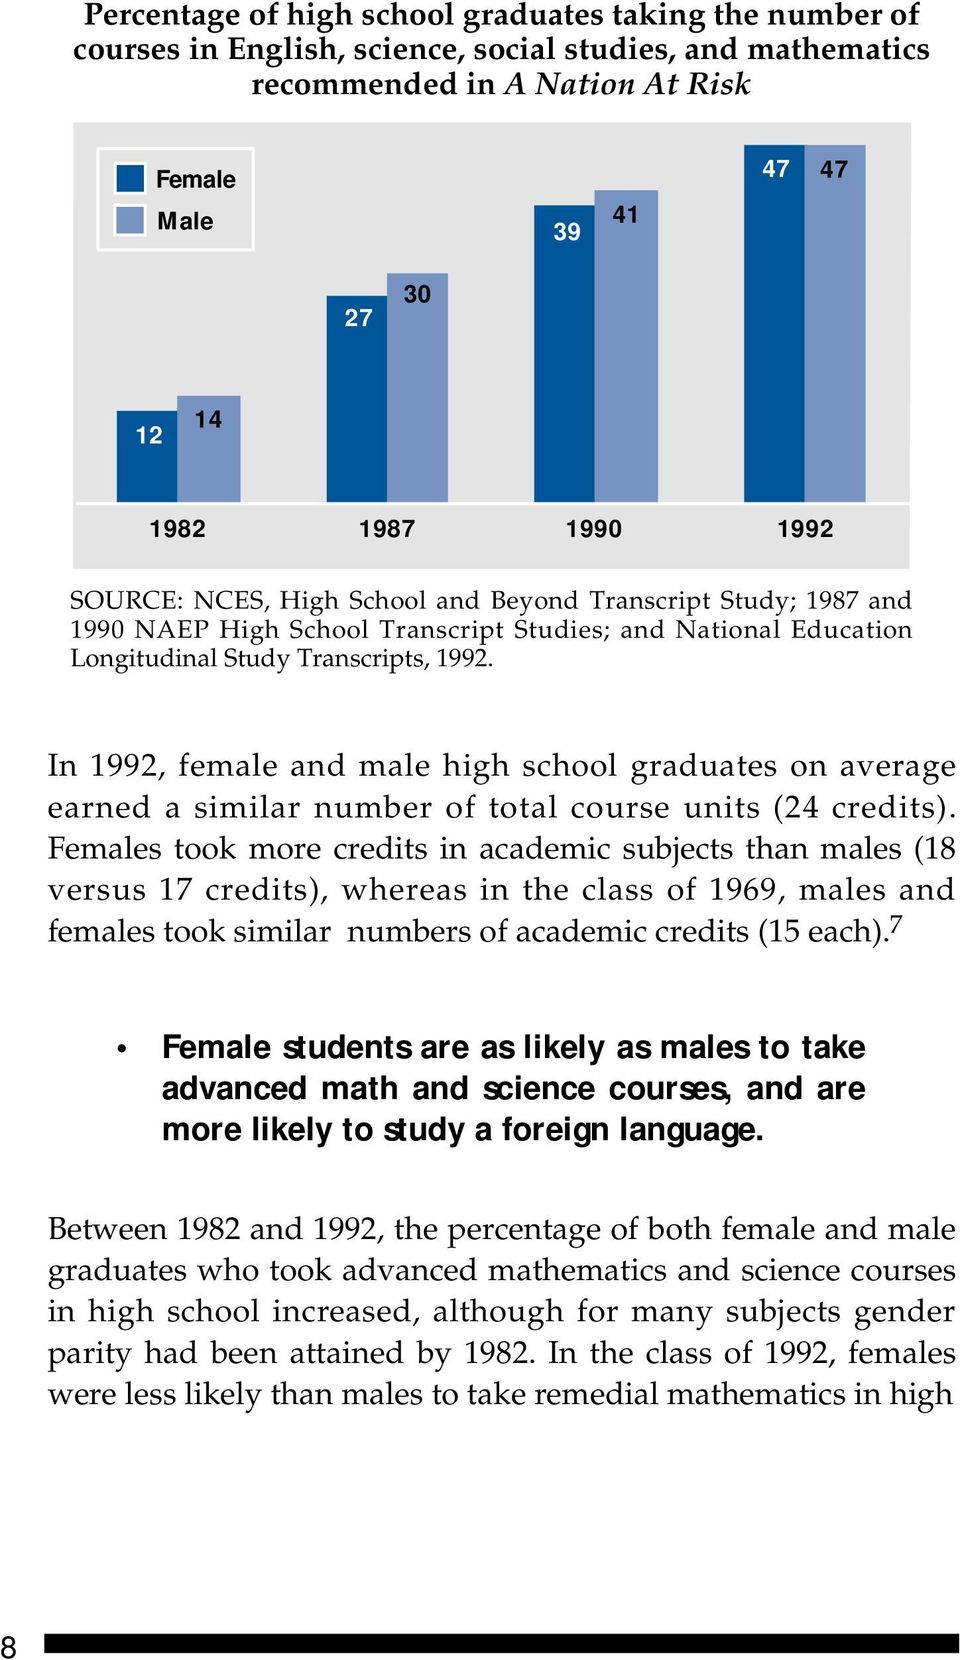 In 1992, female and male high school graduates on average earned a similar number of total course units (24 credits).